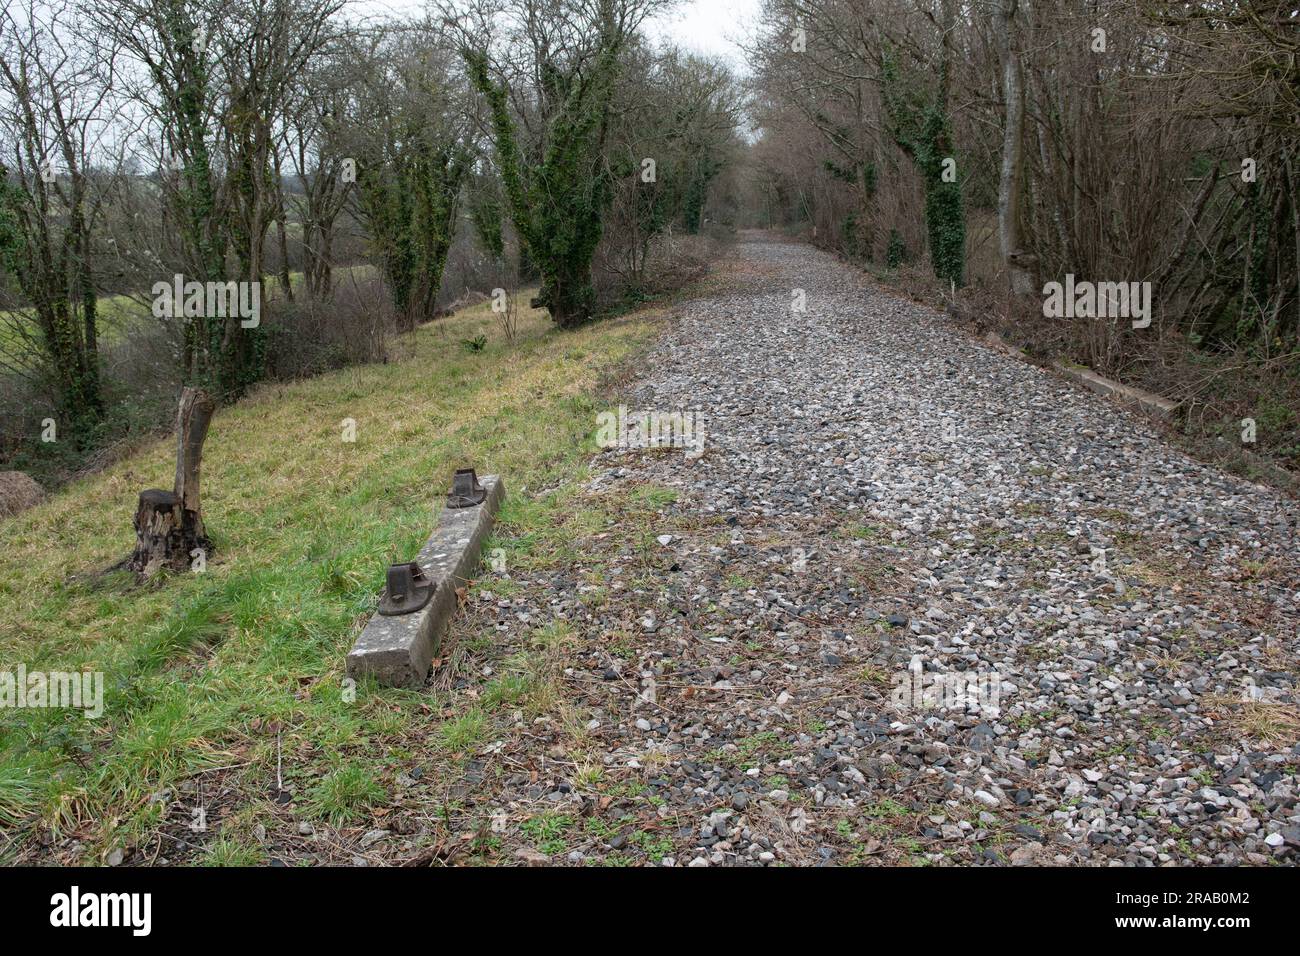 The Disused North Somerset Railway Between Radstock and Frome, Somerset, England. Stock Photo